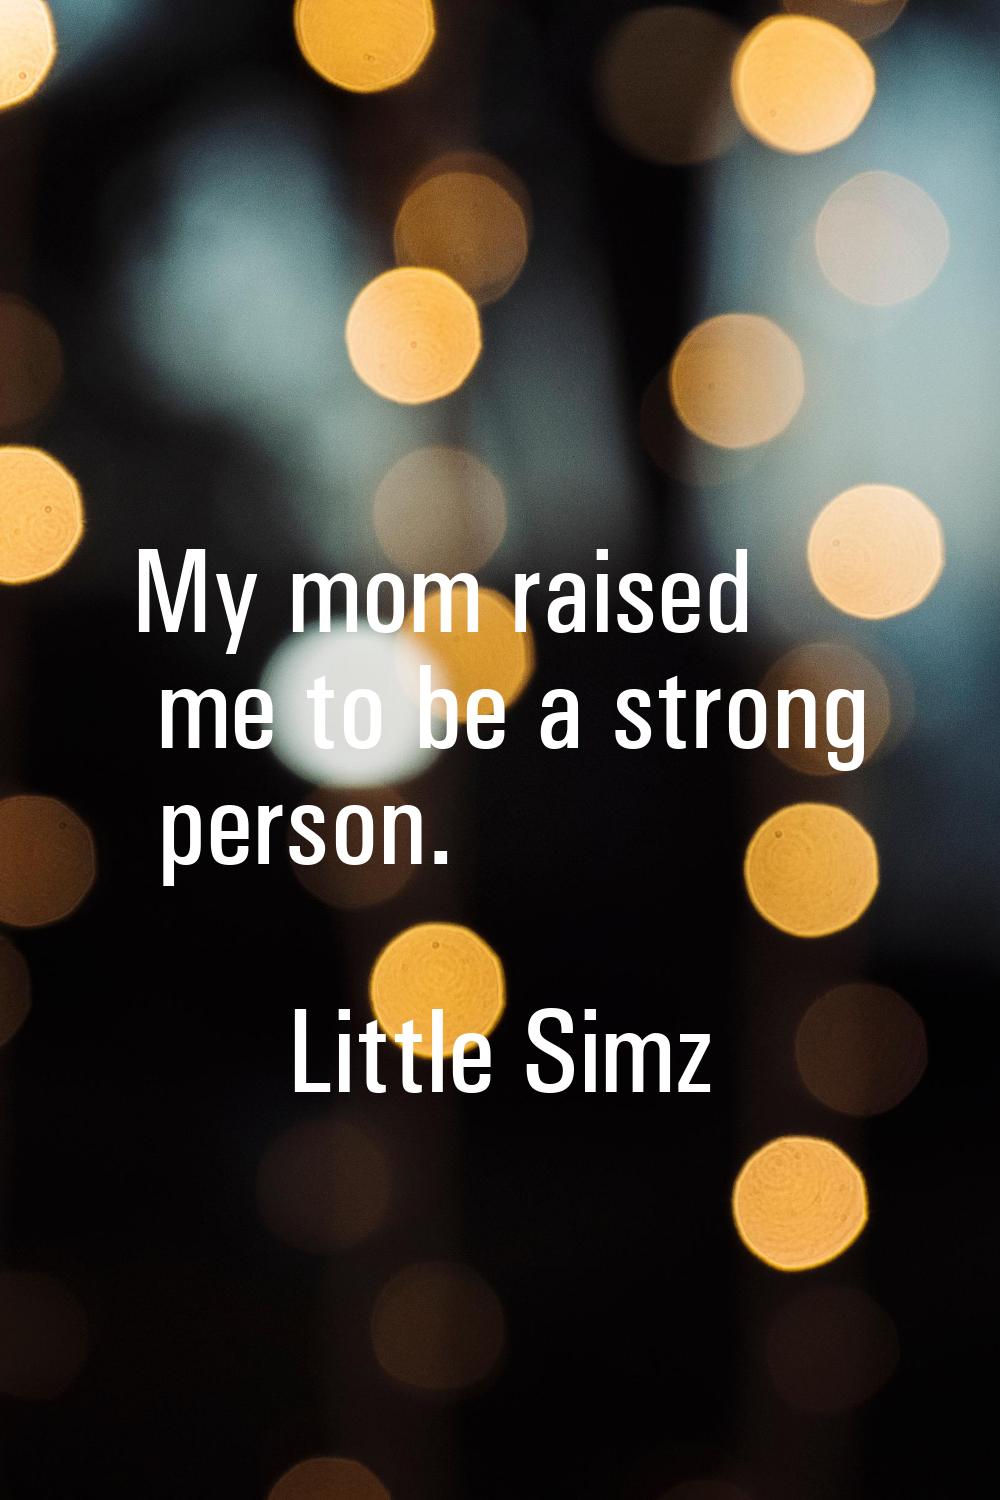 My mom raised me to be a strong person.